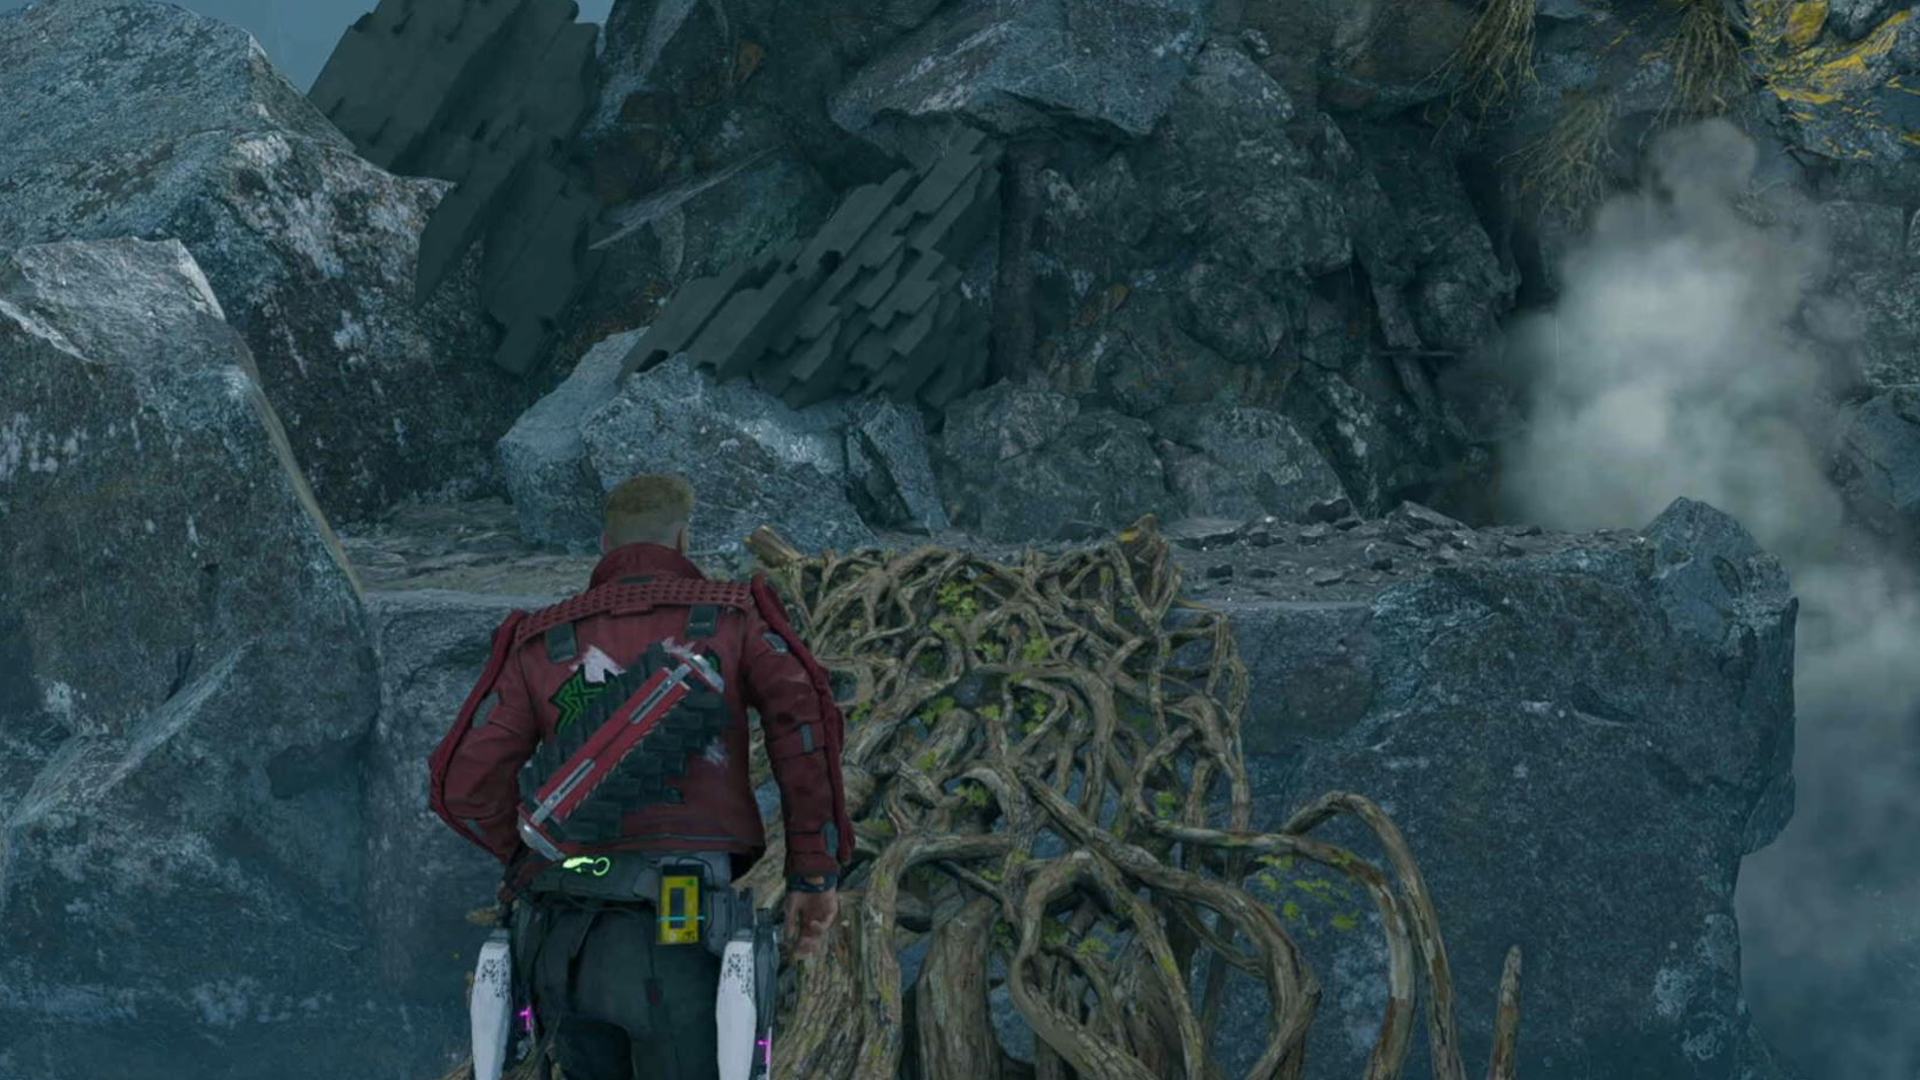 Guardians of the Galaxy outfit locations: Star-Lord is walking across one of Groot's bridges.